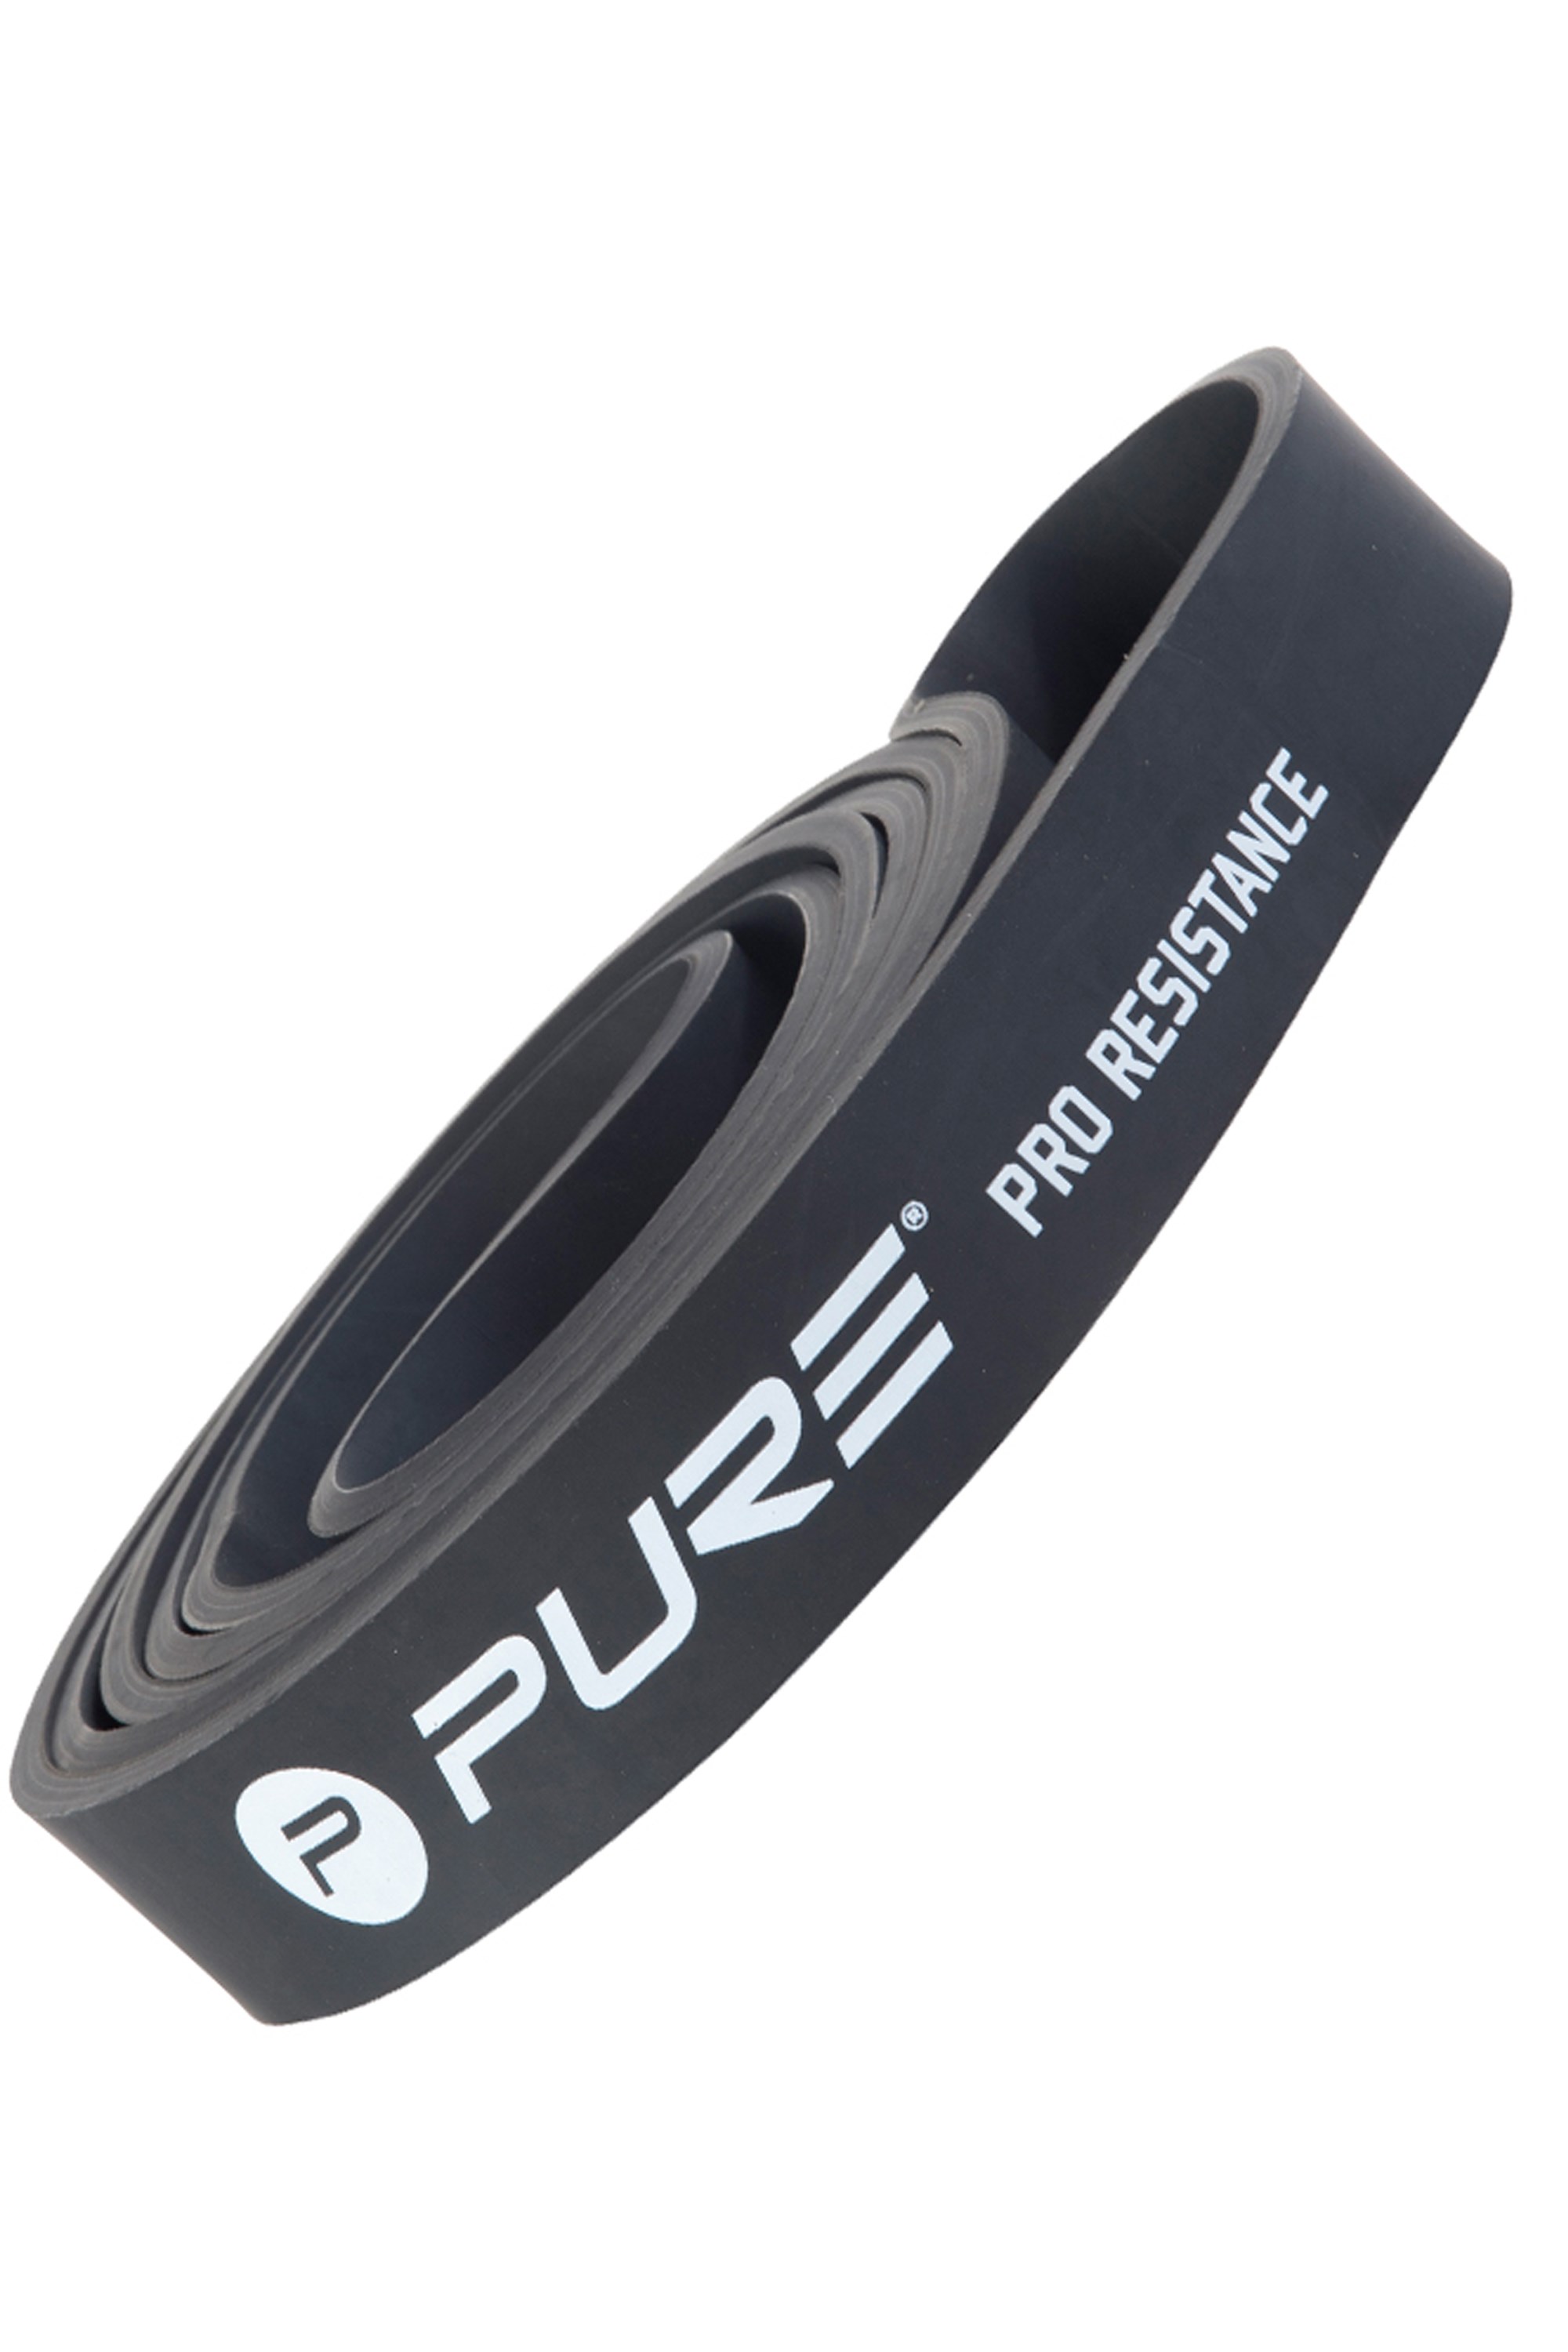 Pro Resistance Band -